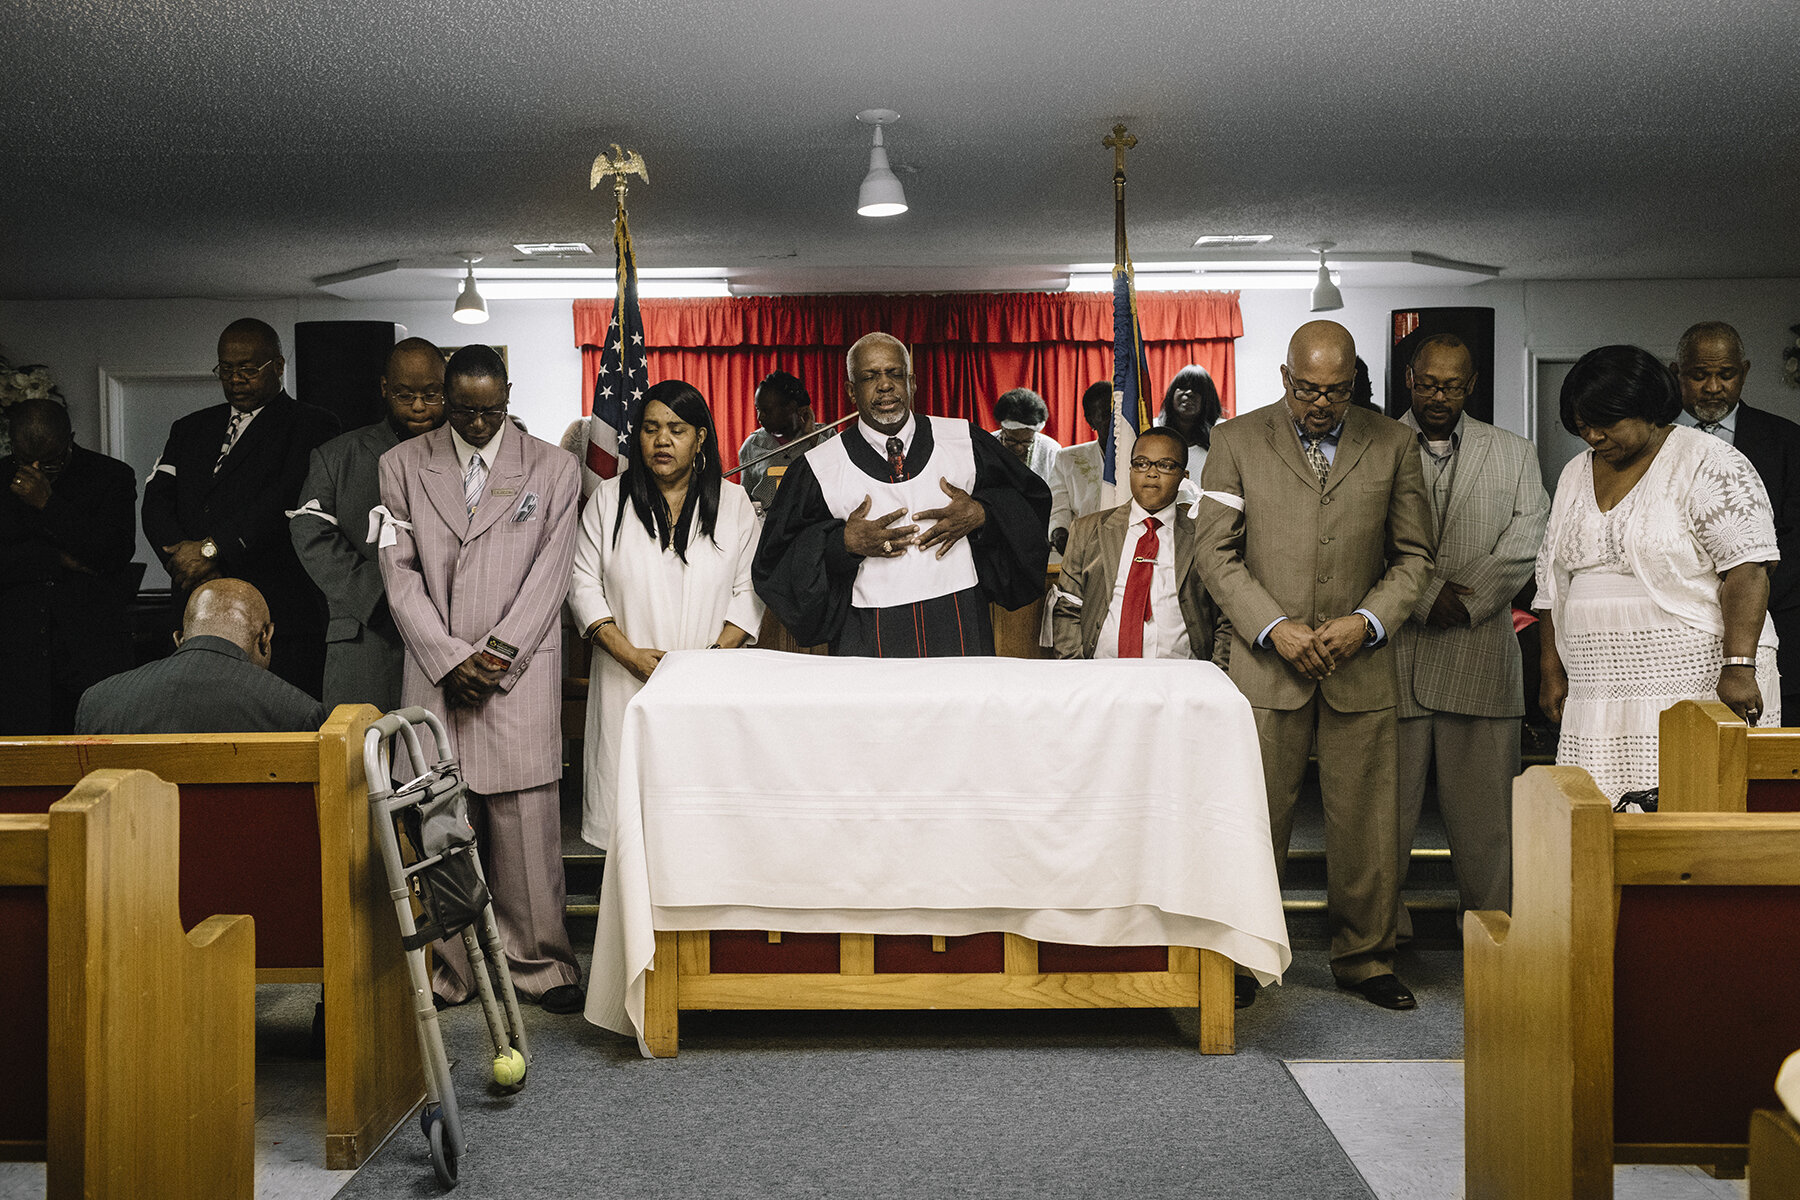  Opelousas, LA - April 7, 2019 - Rev. Gerald Toussaint leads a service at Morning Star Baptist Church. Toussaint serves as pastor at two Baptist churches in the area,  and moved both under one roof after Mt. Pleasant Baptist Church burned down on Apr